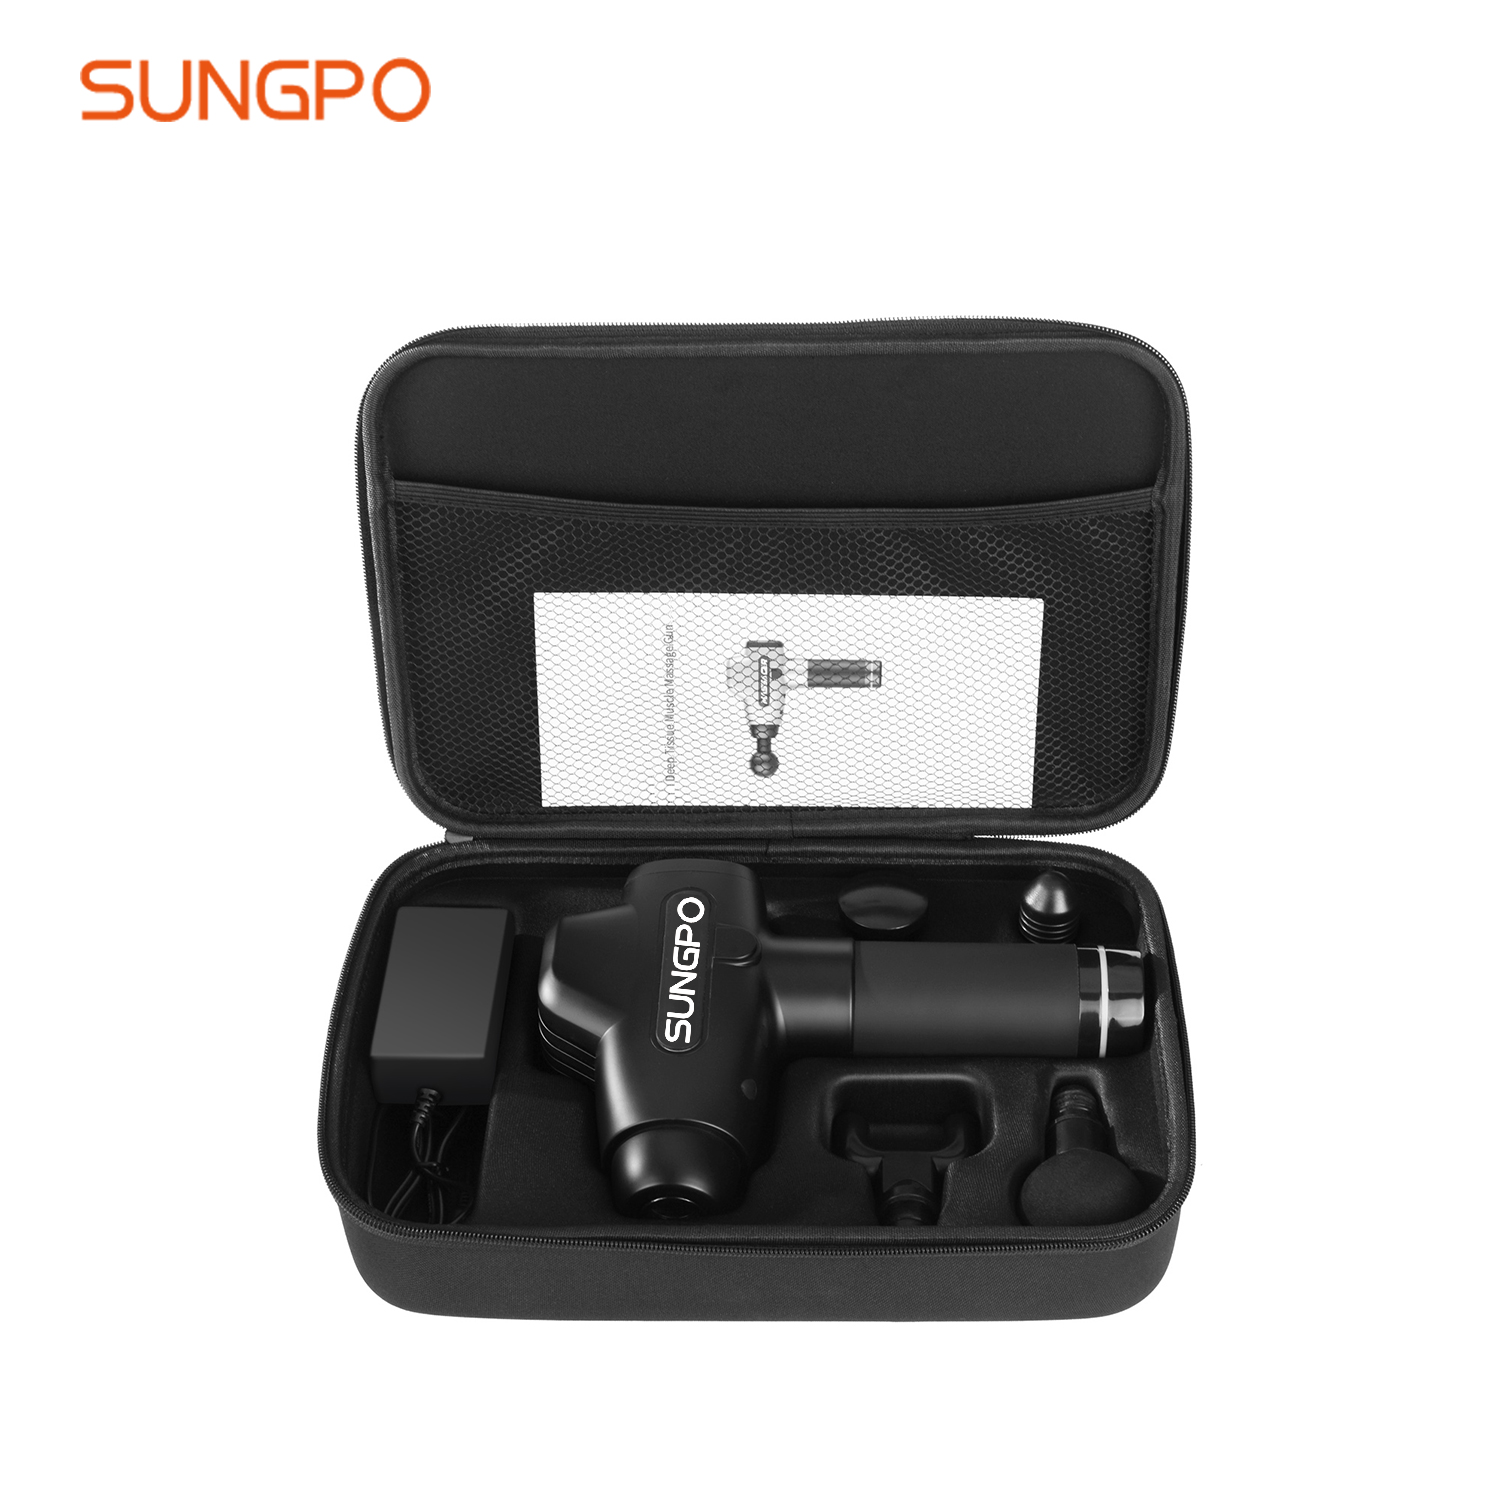 SUNGPO muscle massage machine supplier for exercise-1